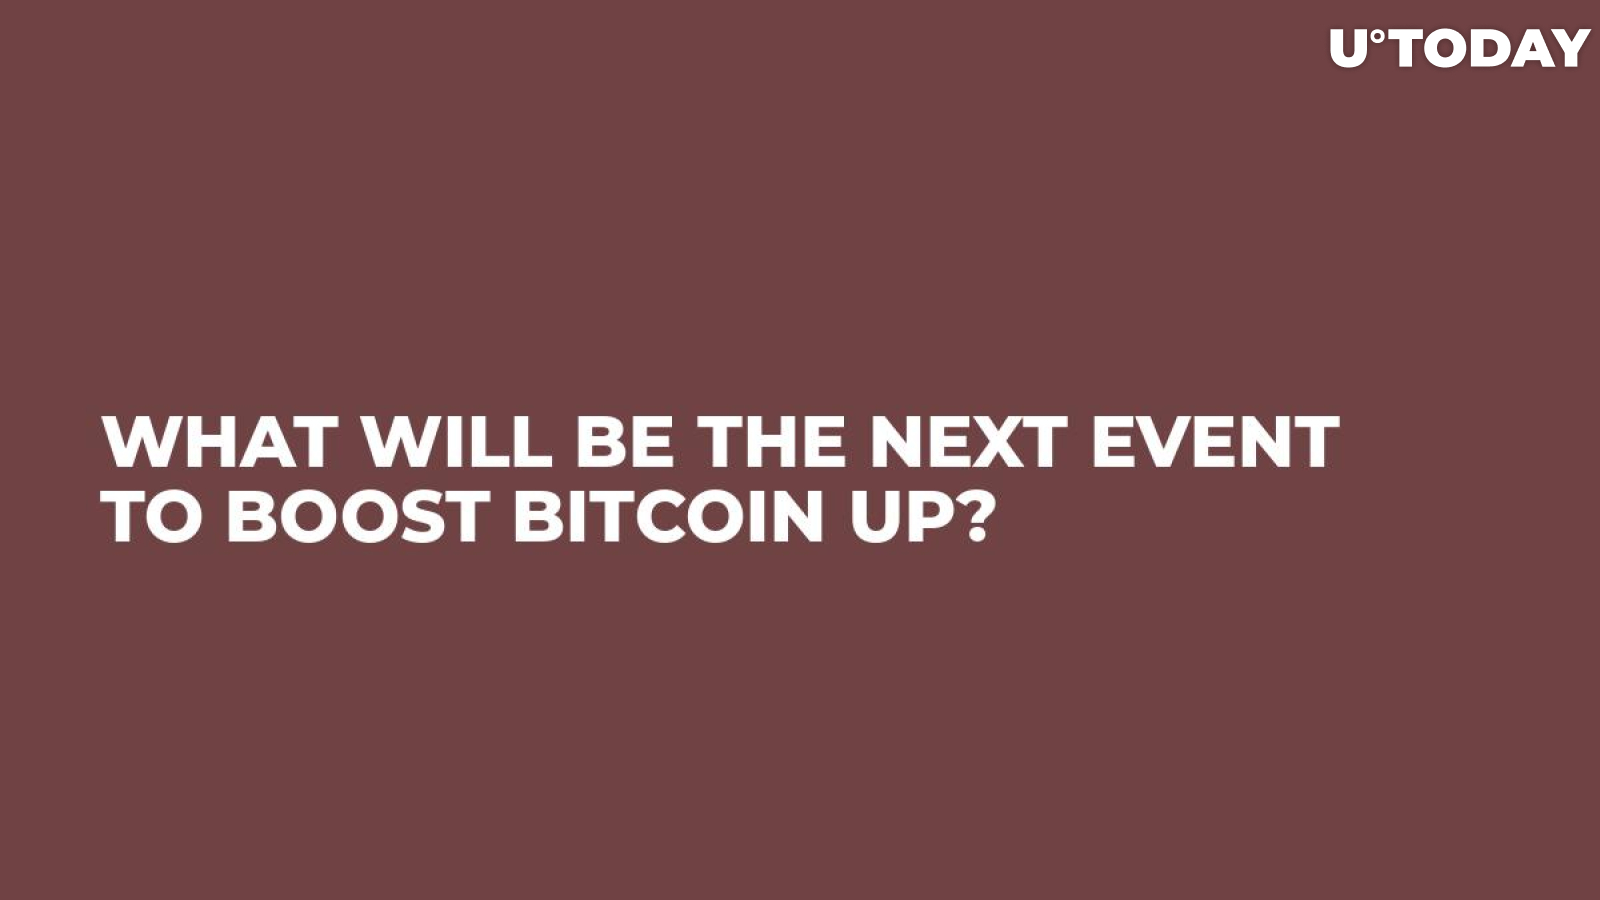 What Will Be the Next Event to Boost Bitcoin Up?